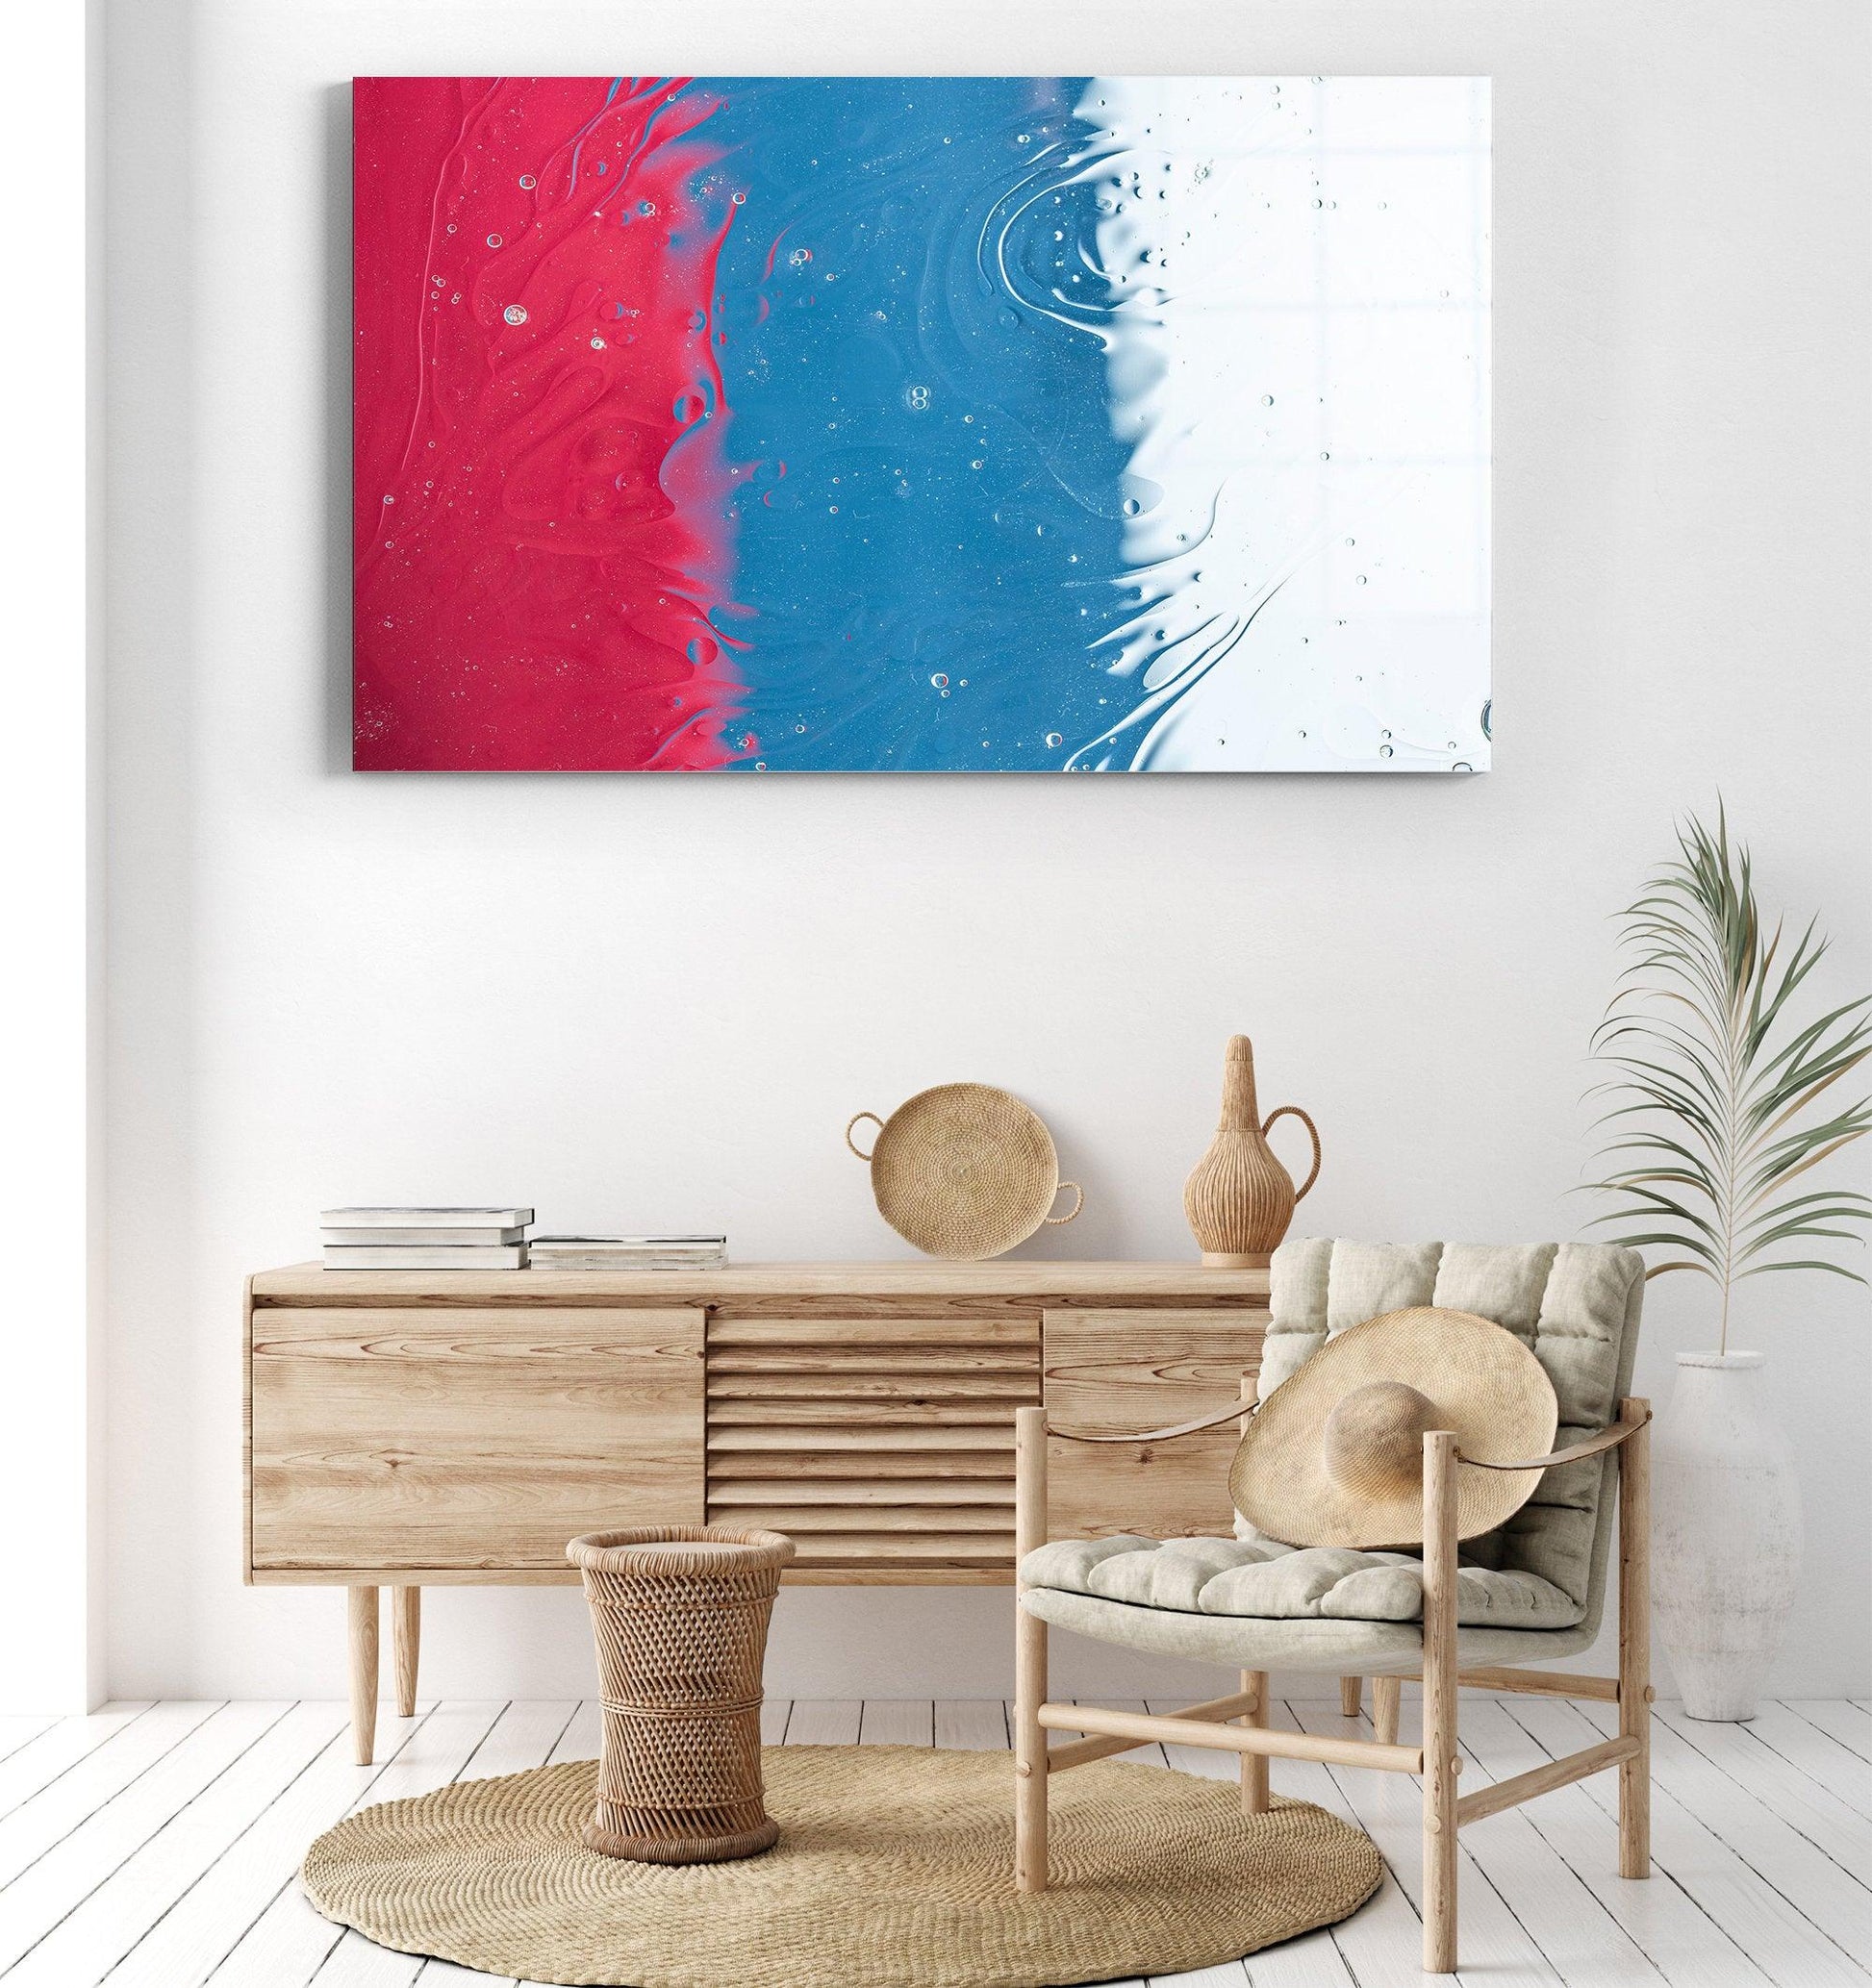 beautiful colorful abstract glass wall art| abstract design canvas wall art, abstract canvas art, blue and pink wall decor, glass gifts - TrendiArt